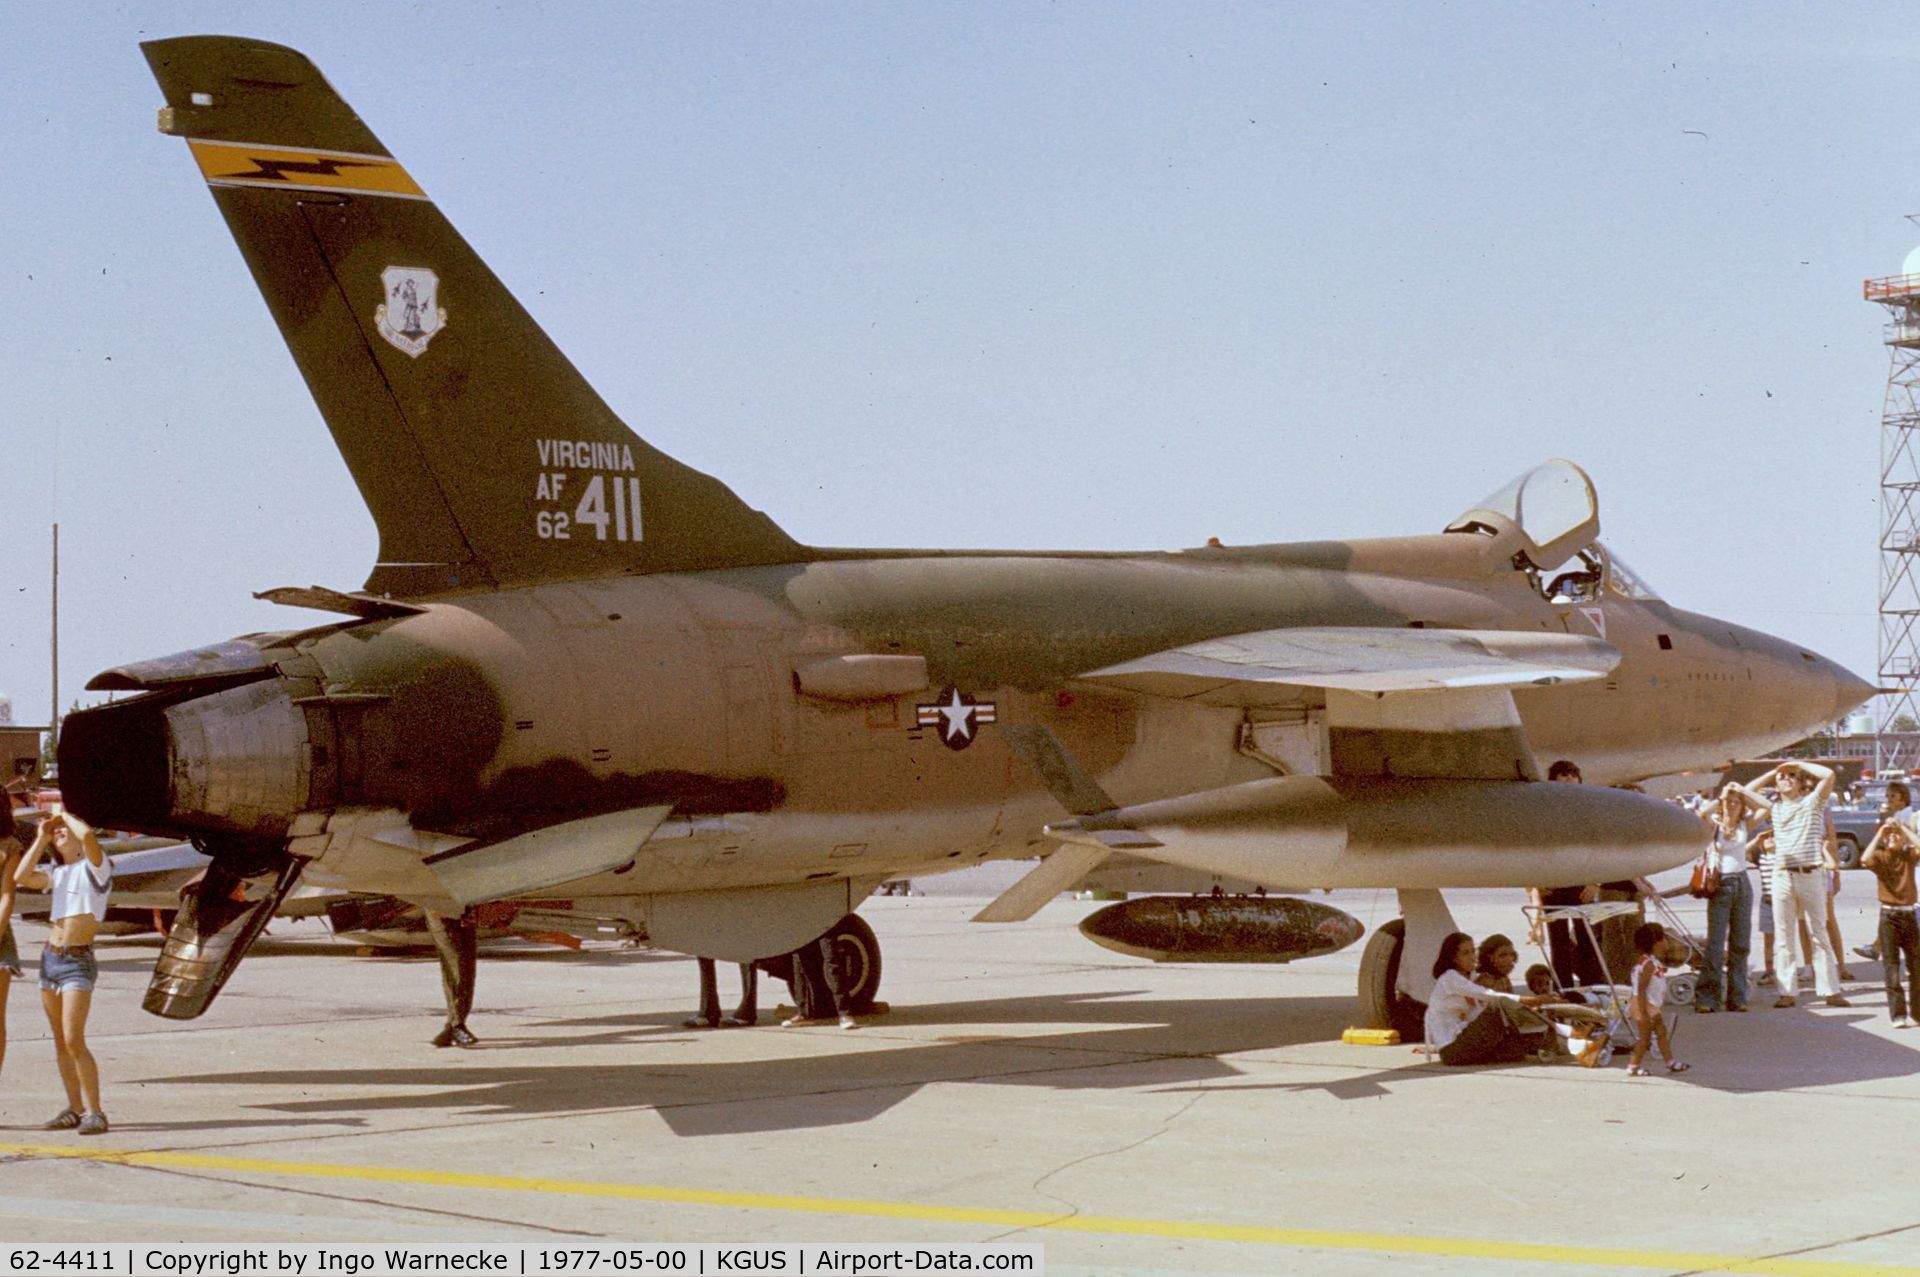 62-4411, 1962 Republic F-105D Thunderchief C/N D610, Republic F-105D Thunderchief of the USAF at the 1977 airshow at Grissom AFB, Peru IN